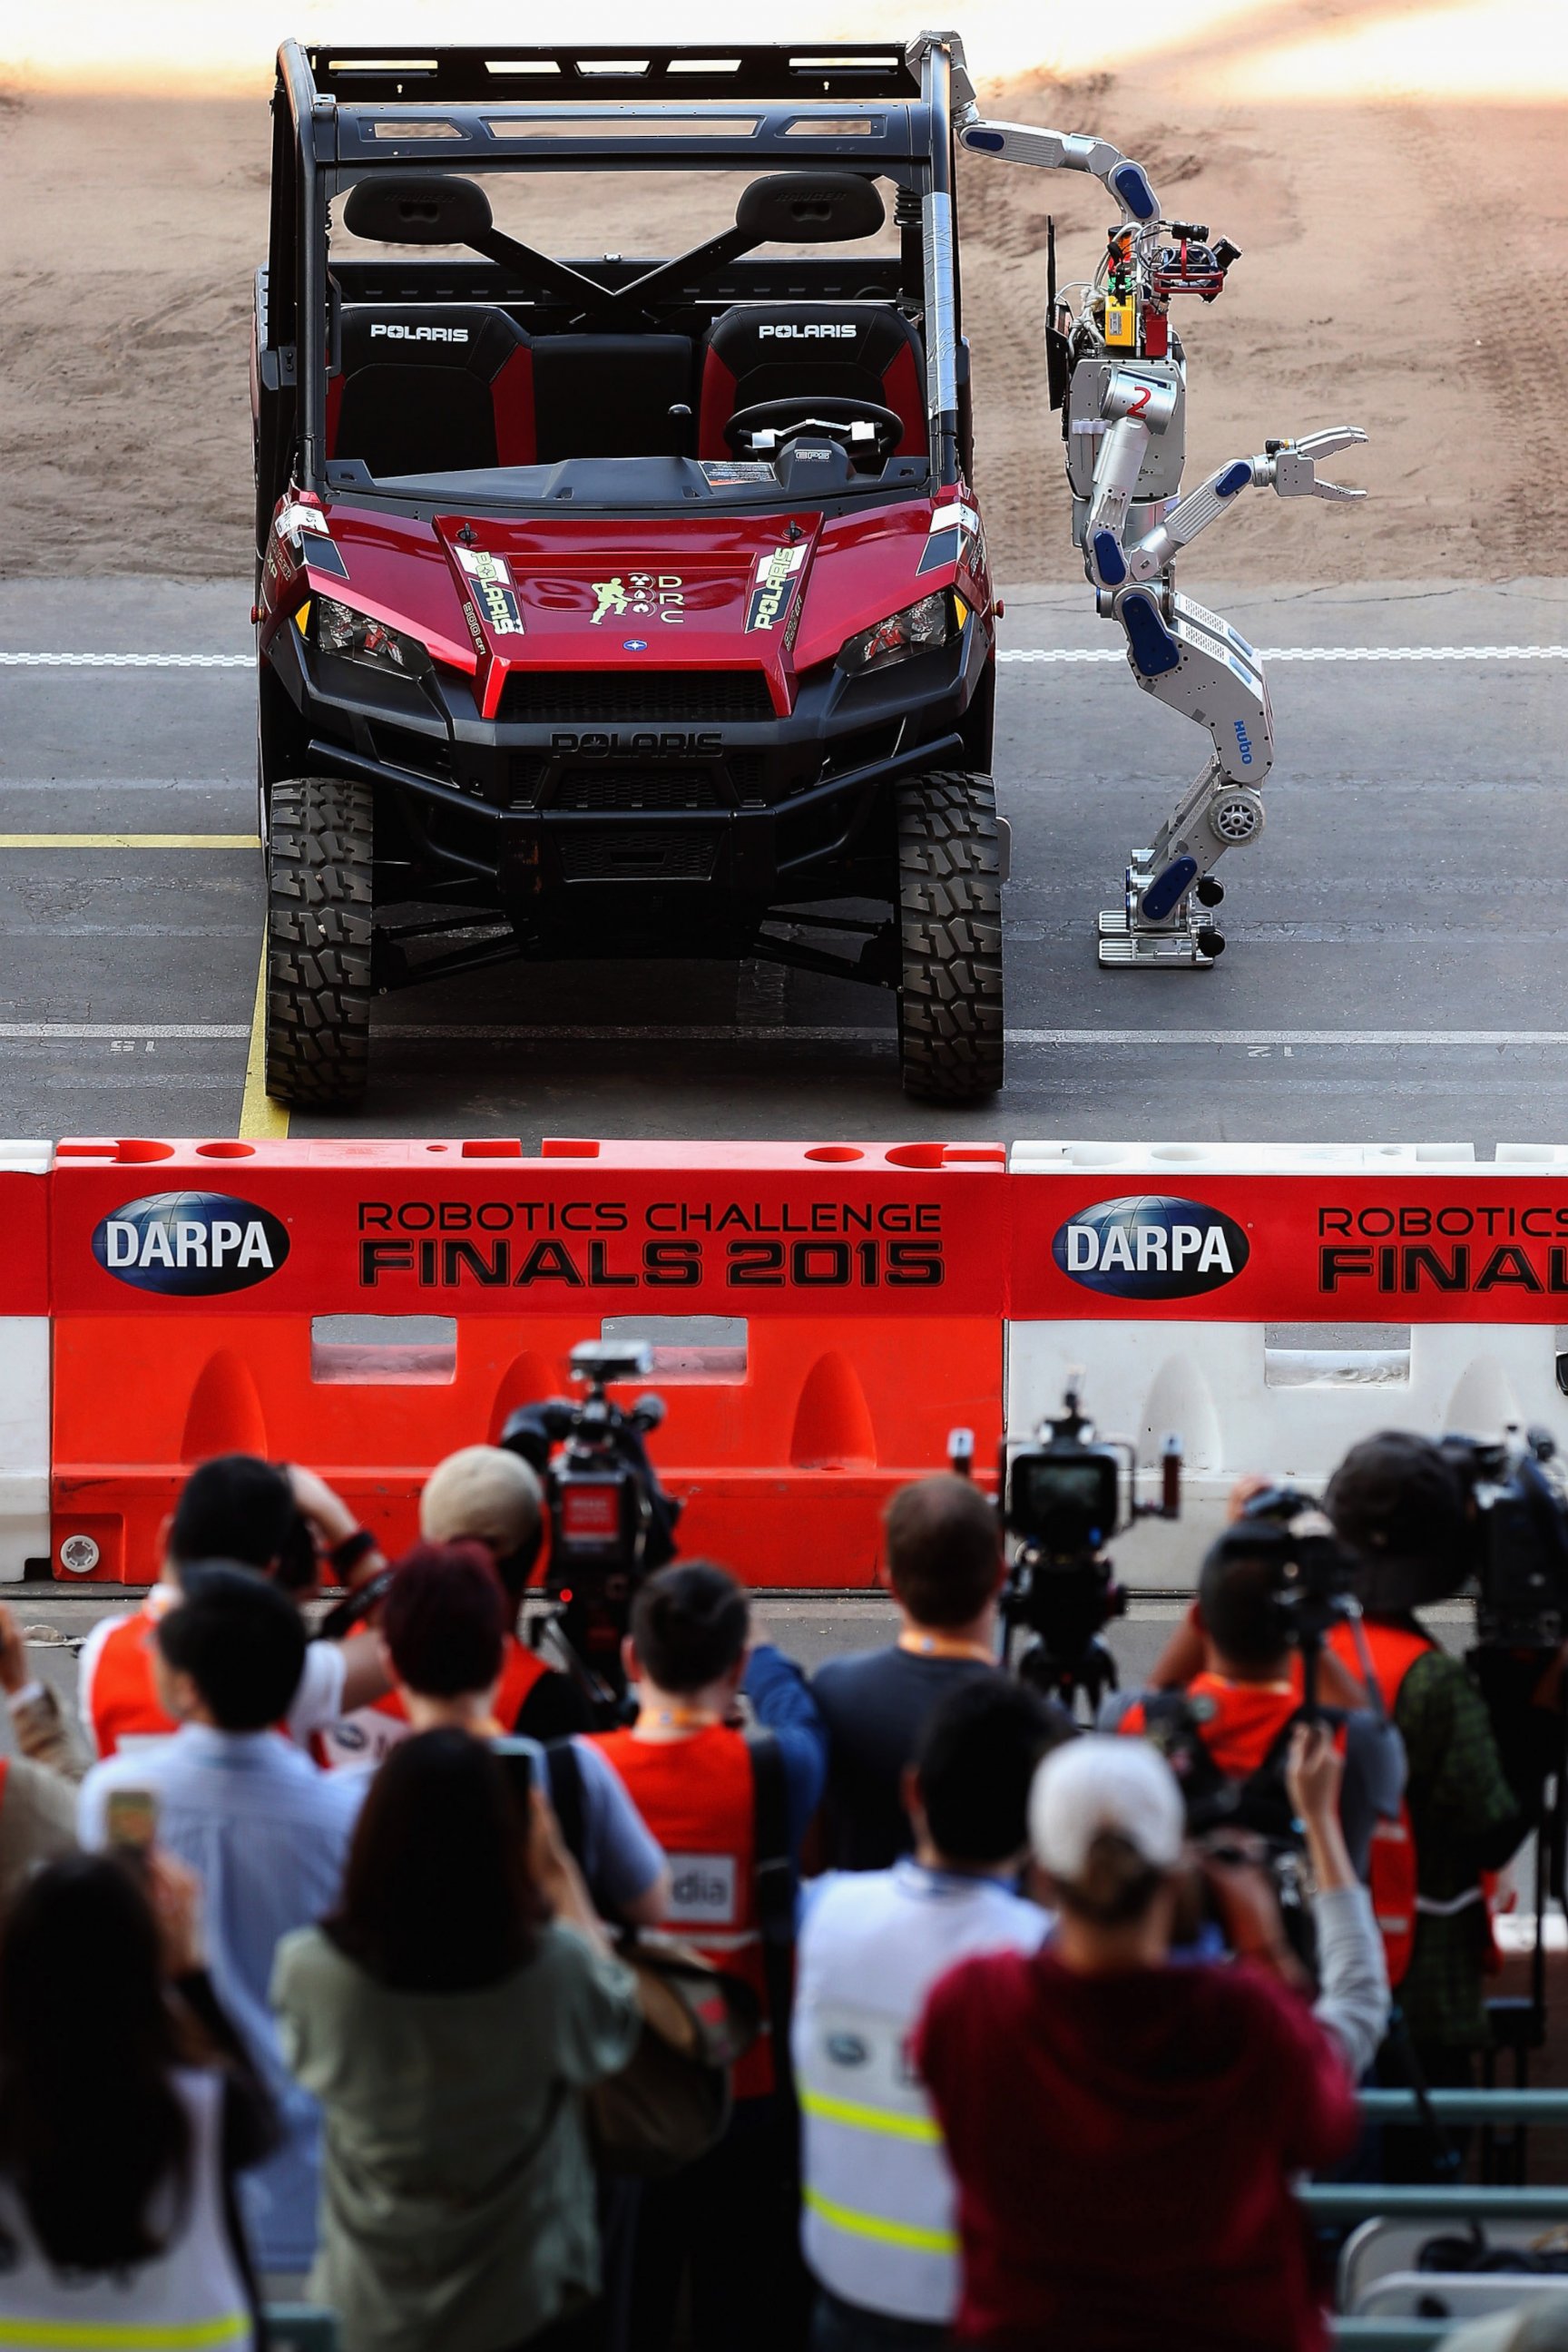 PHOTO: The Team Kaist HUBO robot from South Korea climbs out of a Polairs vehicle during the first day of the Defense Advanced Research Projects Agency (DARPA) Robotics Challenge at the Fairplex, June 5, 2015, in Pomona, Calif. 